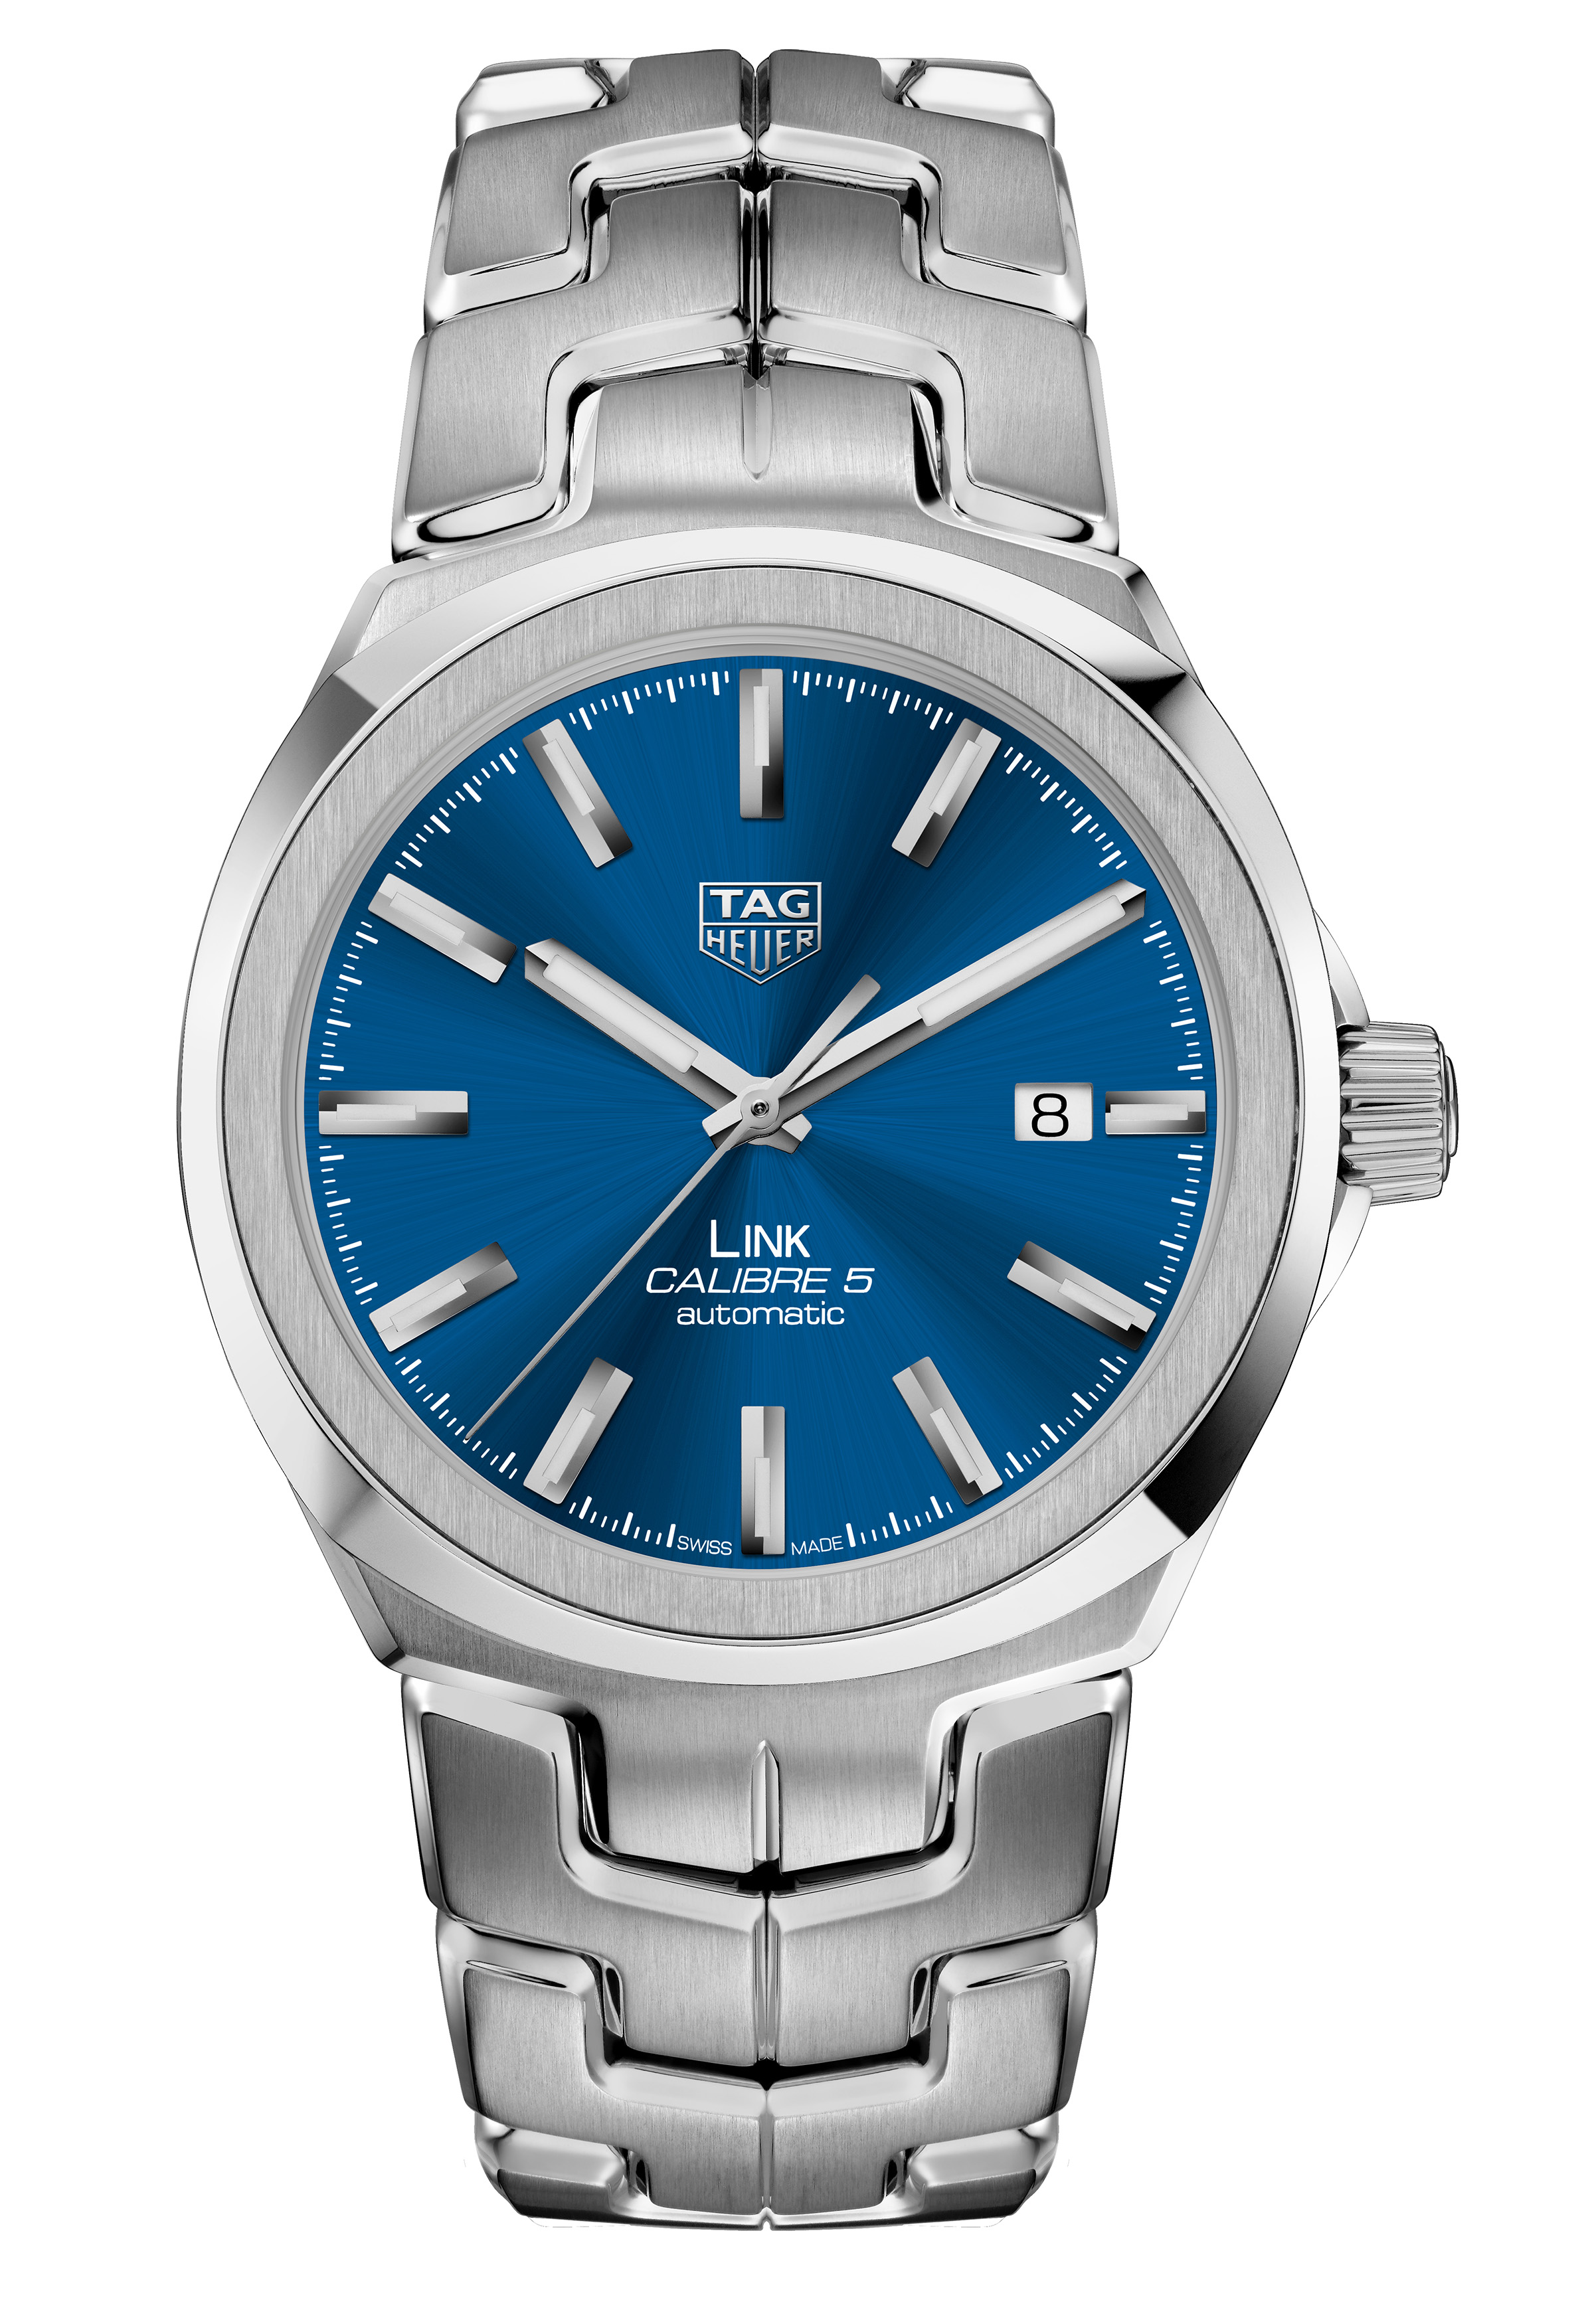 Introducing: The TAG Heuer Link - HODINKEE